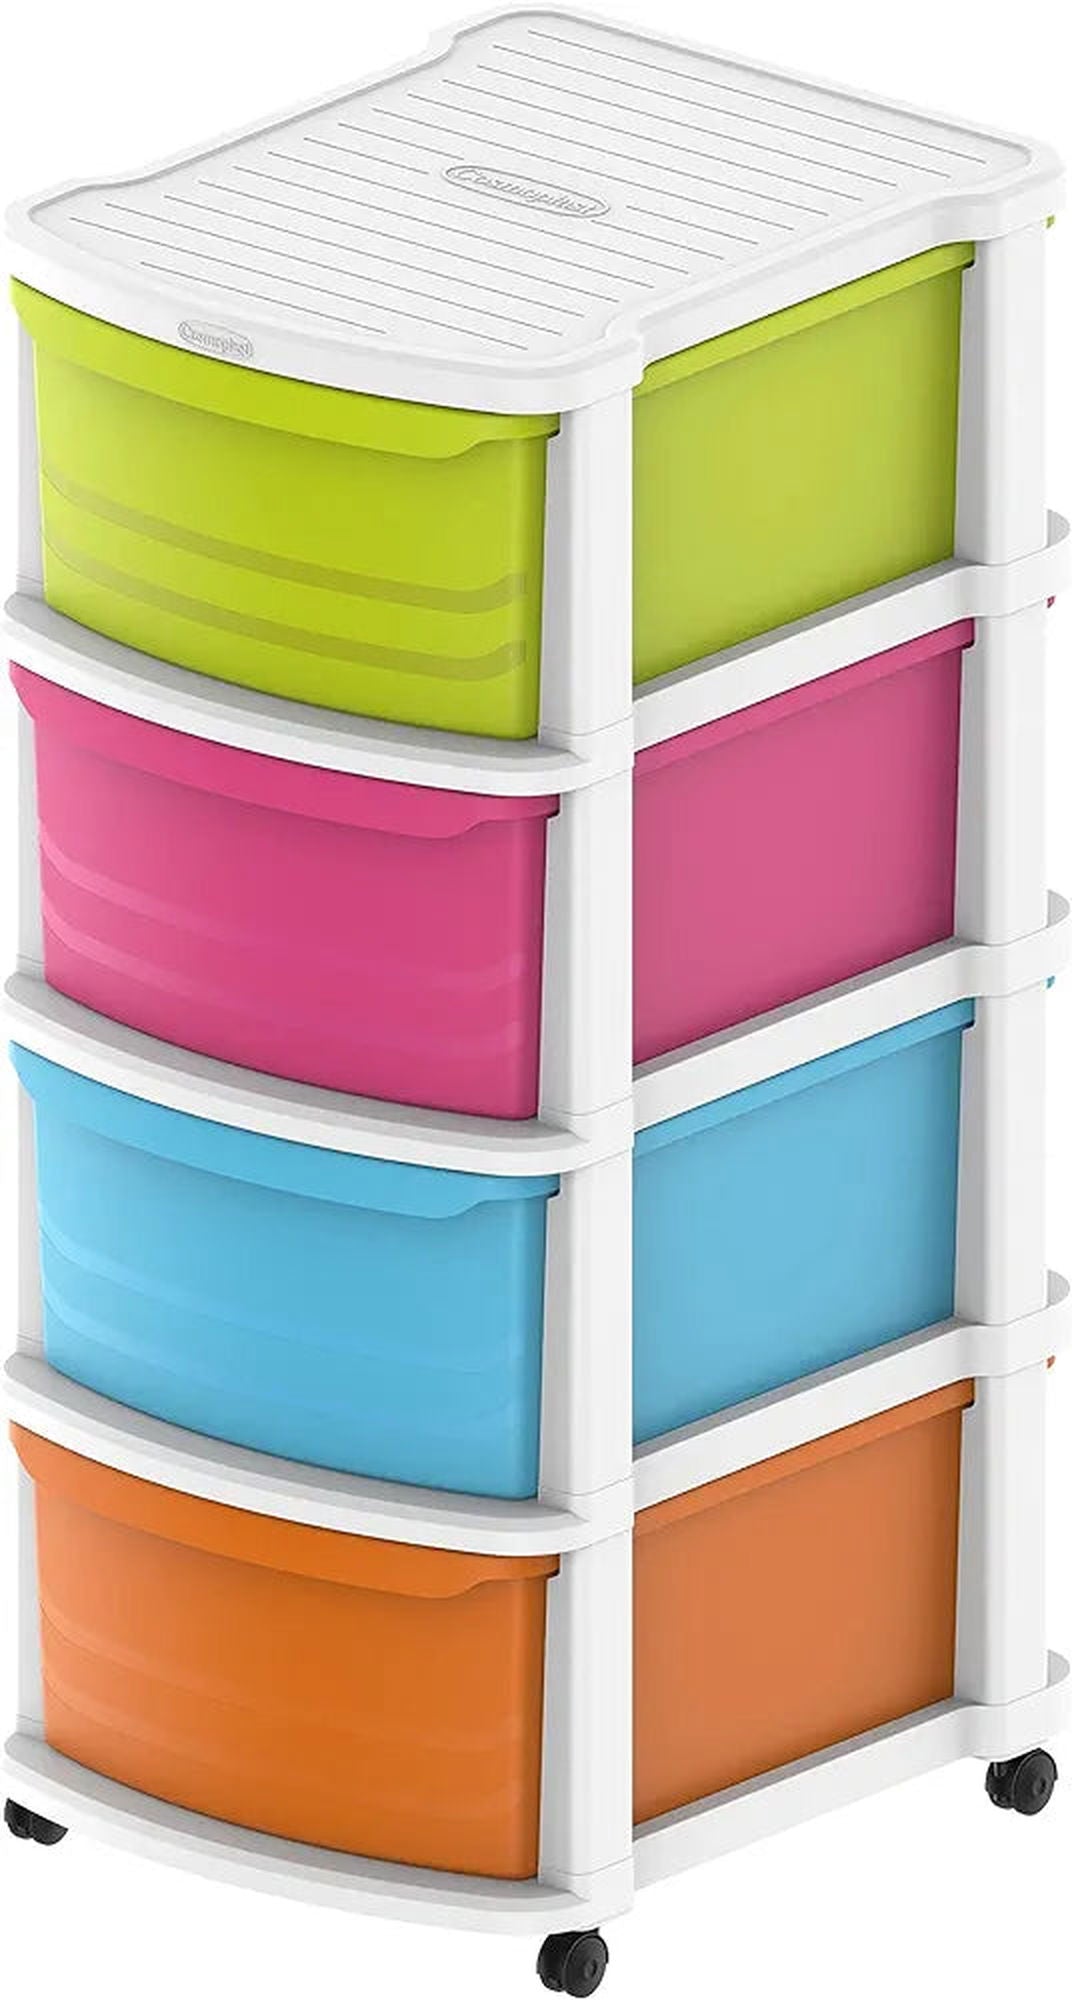 Cosmoplast 4-layer multi-purpose storage cabinet with white wheels and multi-colored drawers